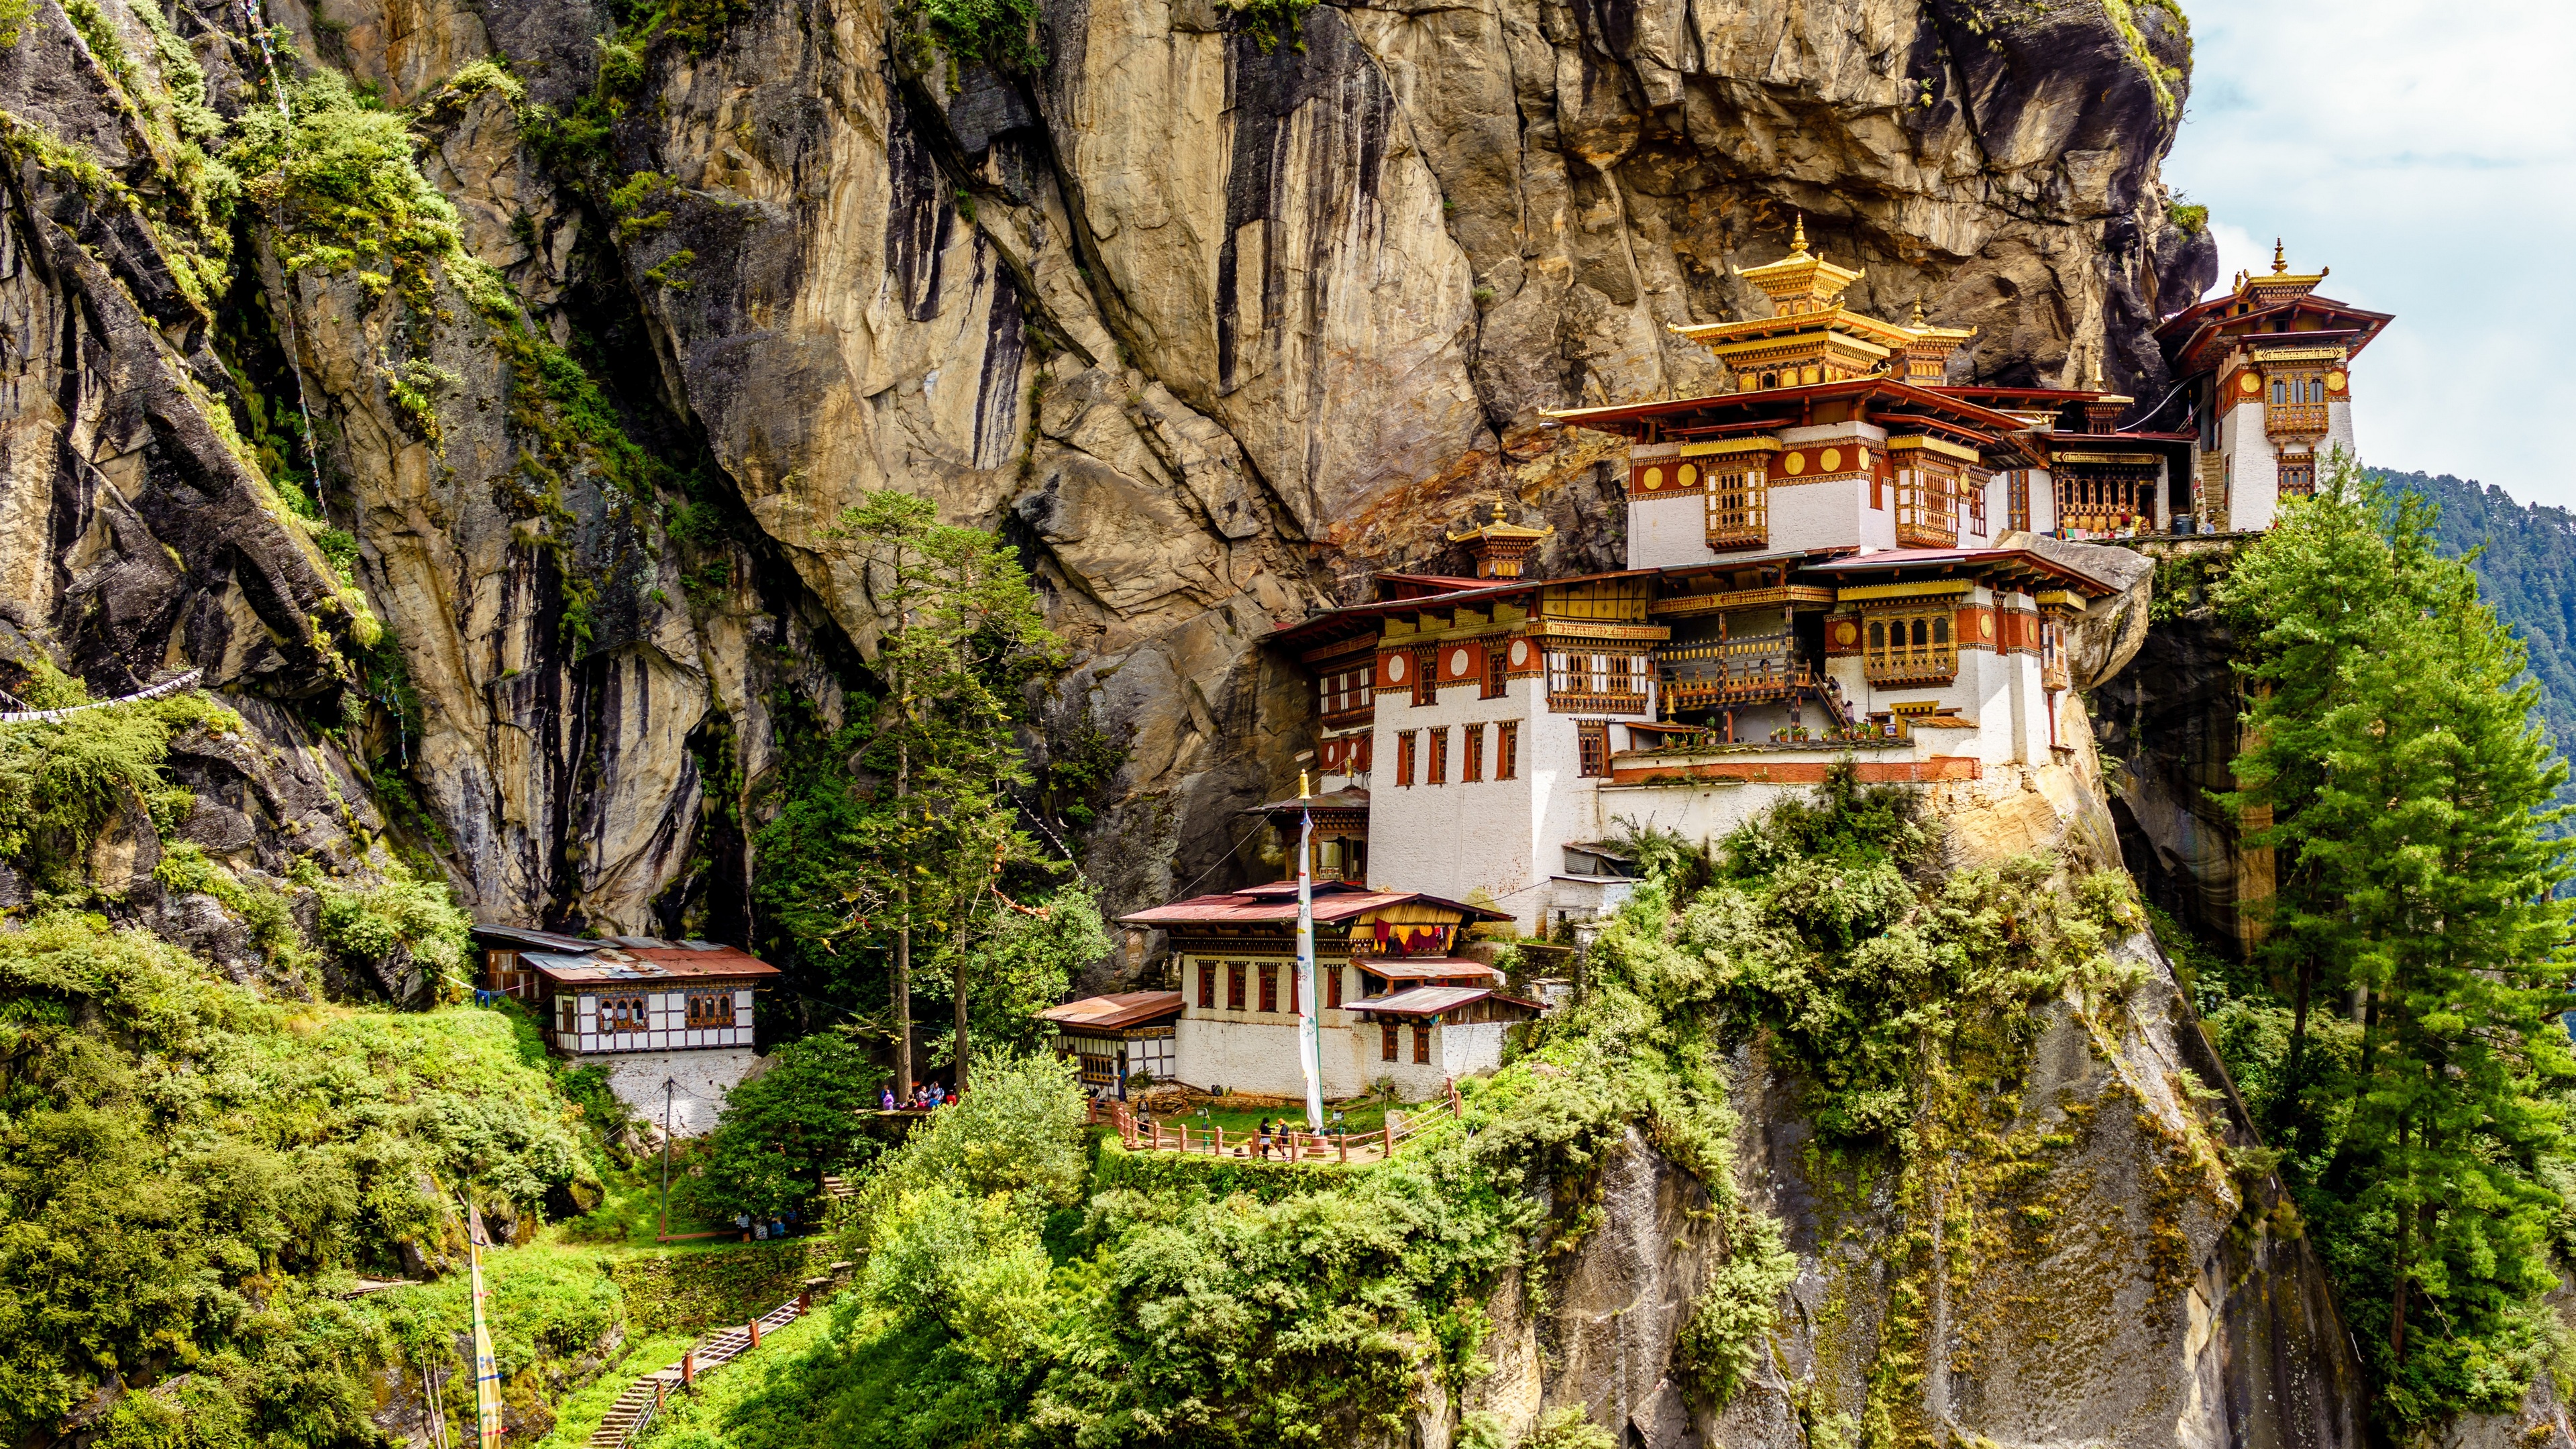 Bhutan Nature Rock Taktsang Monastery Trees Temple Cliff House Buddhism Mountains Asia Outdoors Rock 3840x2160